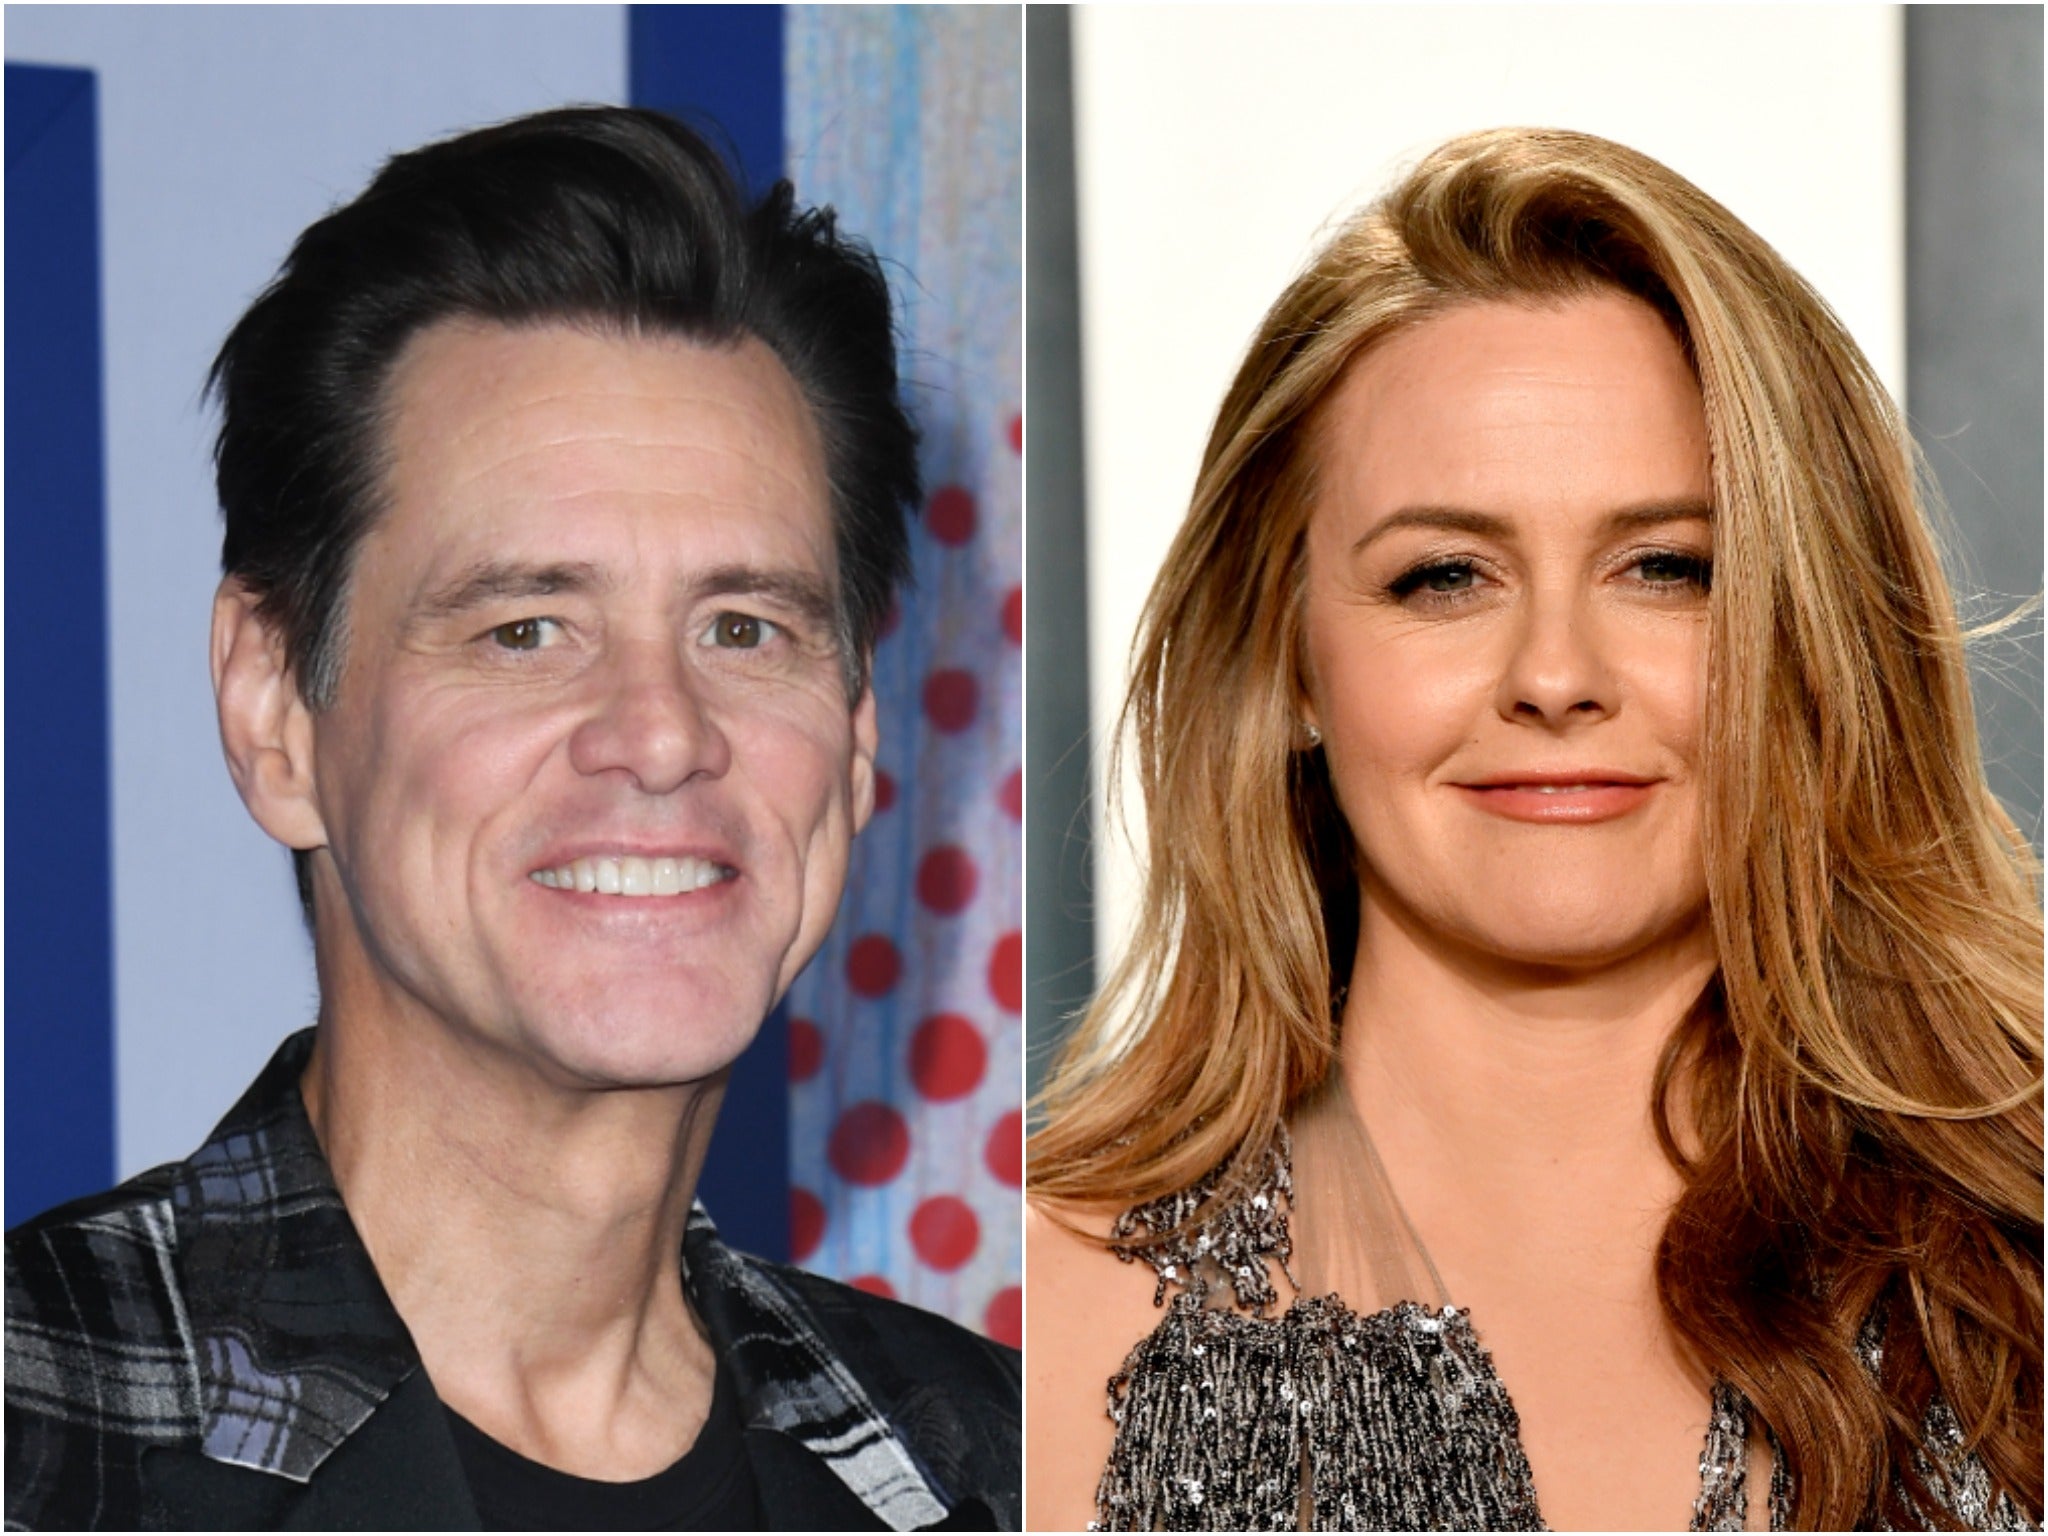 Jim Carrey video showing actor forcibly kissing Alicia Silverstone resurfaces after Will Smith slap criticism The Independent